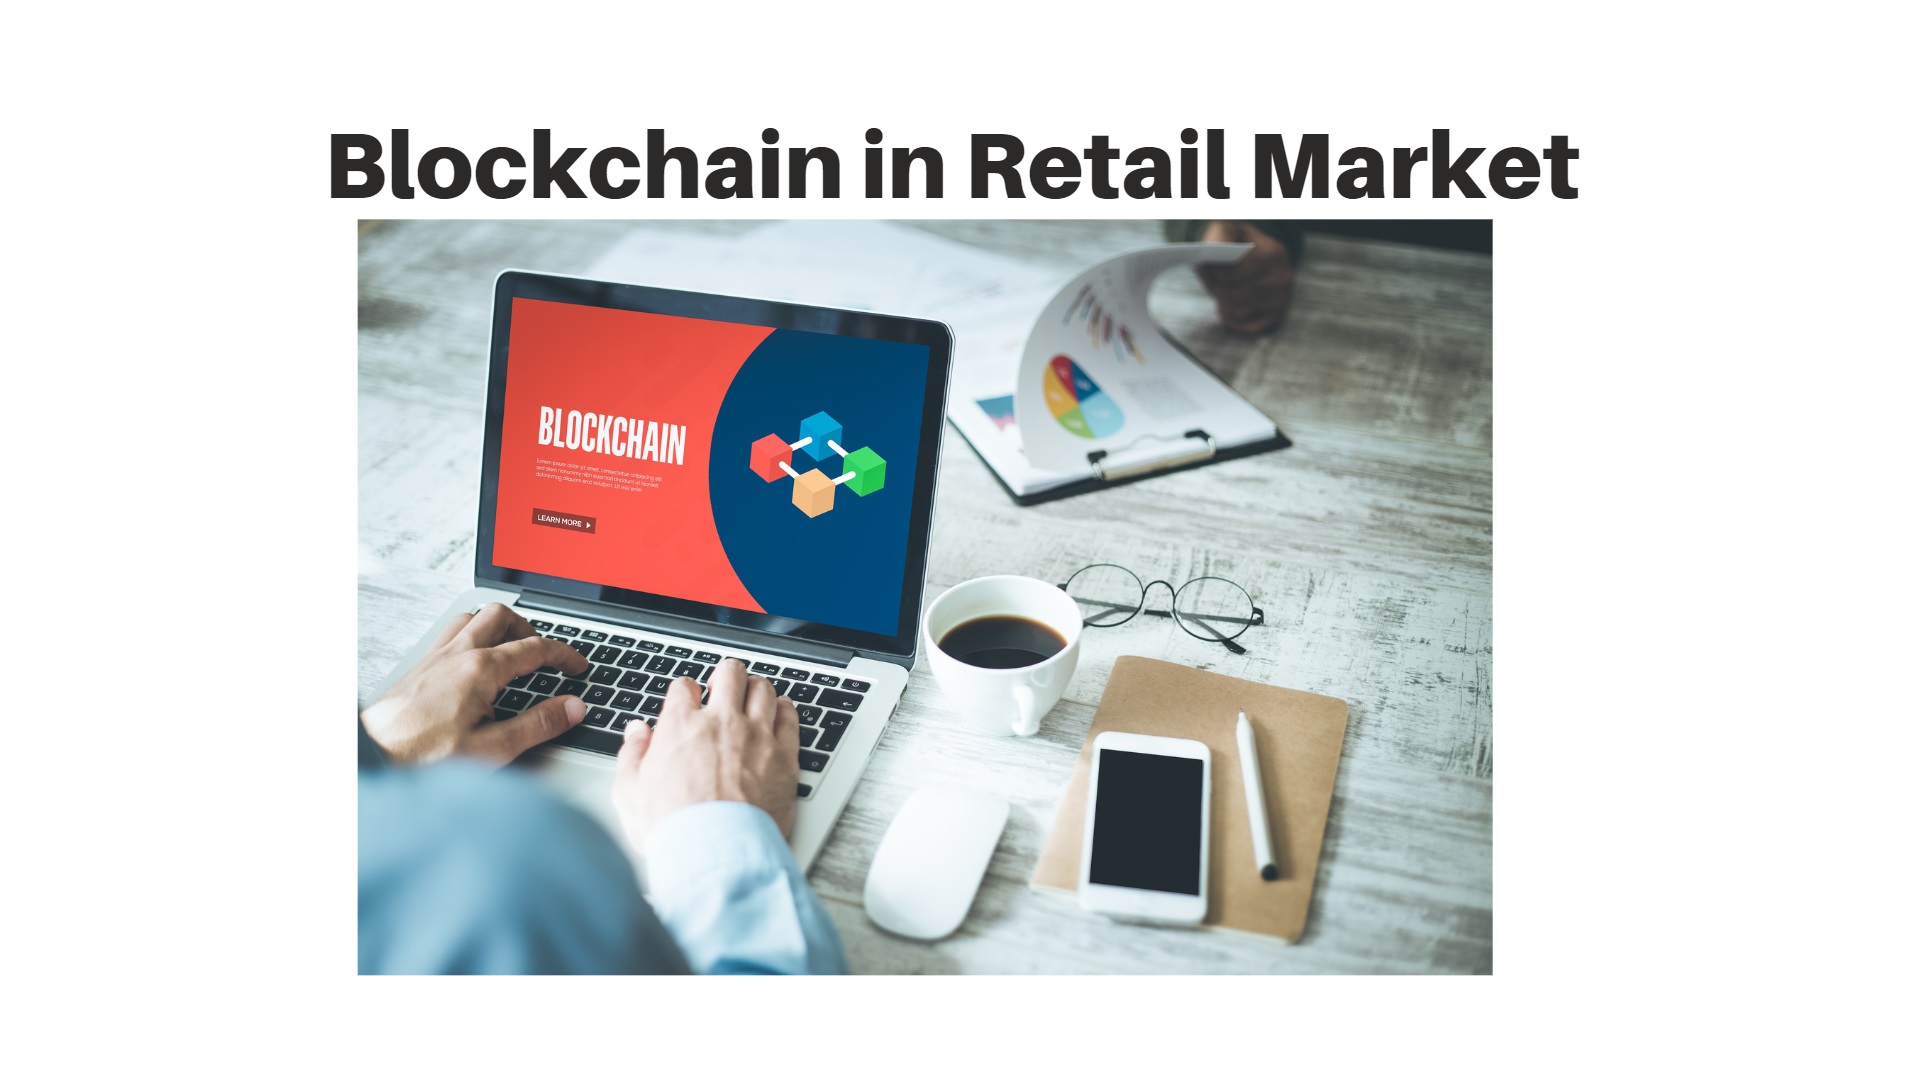 Blockchain in Retail Market size is projected to reach USD 9117.12 Mn by 2033, and Growth rate (CAGR) of 42.8%